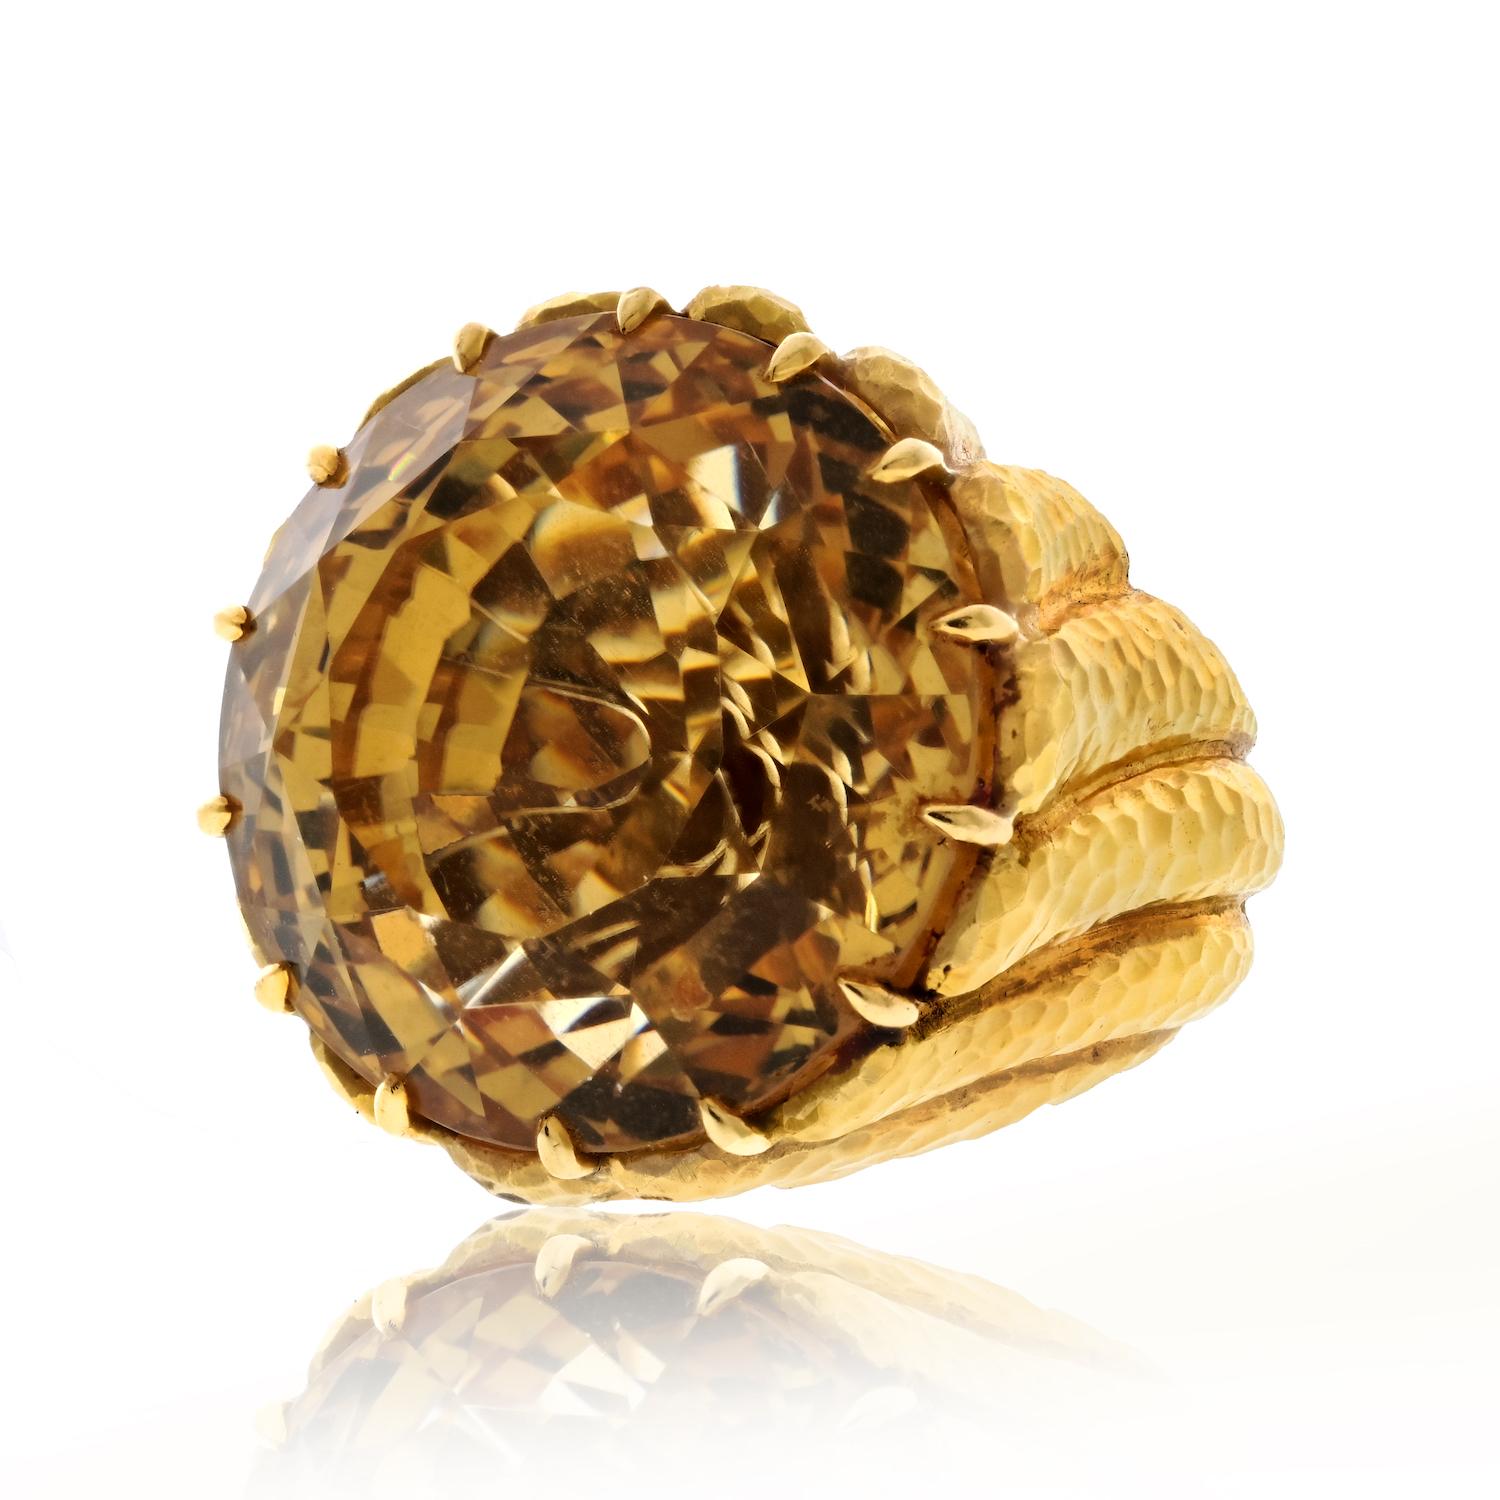 This estate David Webb cocktail ring is an exquisite blend of timeless design and craftsmanship. The focal point of this elegant piece is a stunning 24mm wide citrine gemstone. Set in a luxurious combination of platinum and 18K yellow gold, this